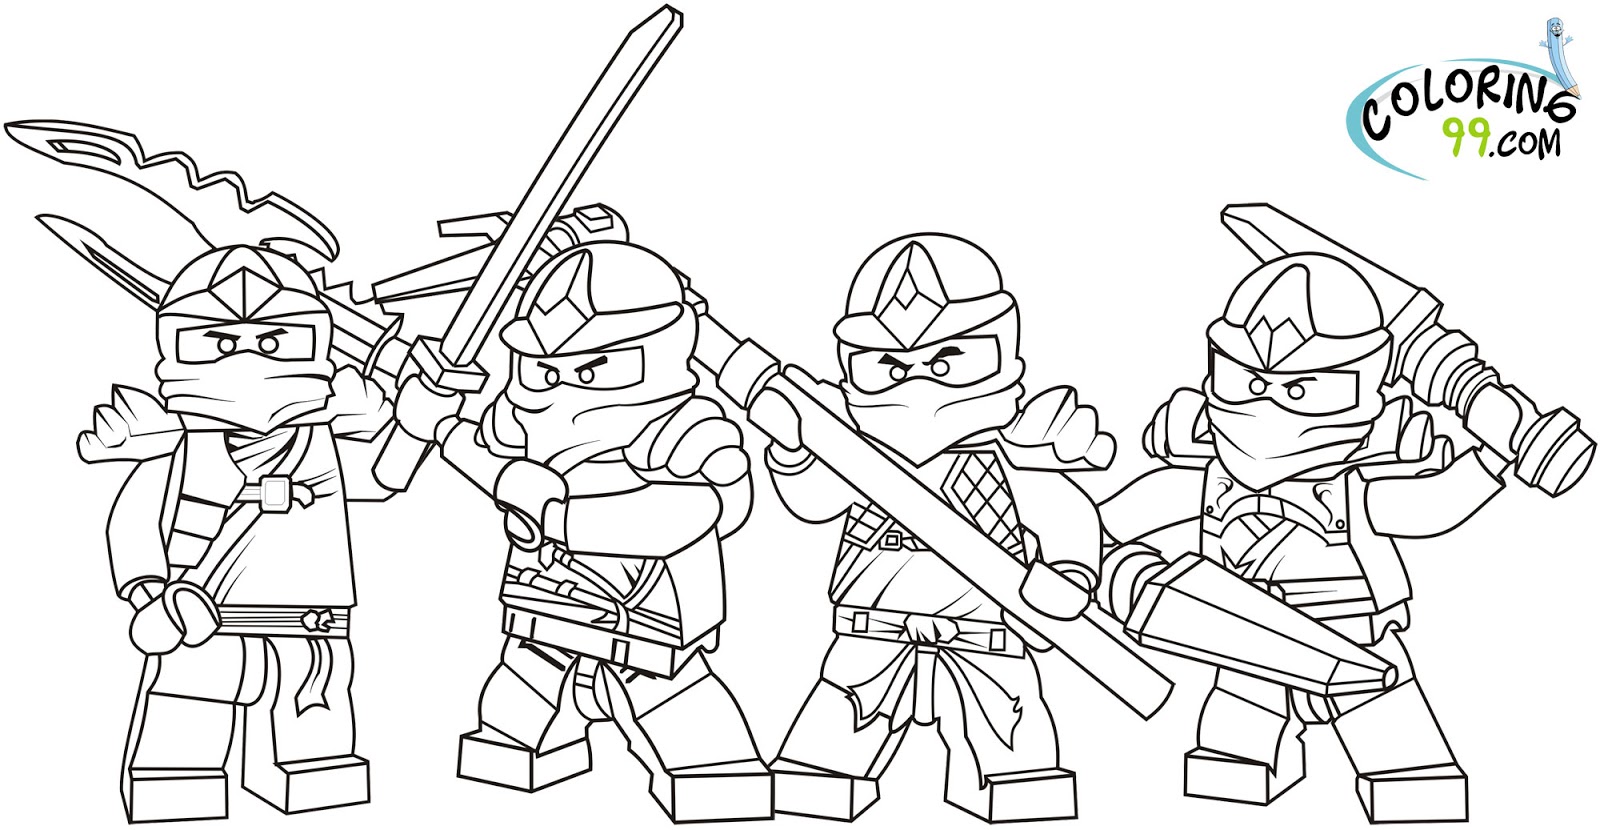 lego-ninjago-coloring-pages-team-colors